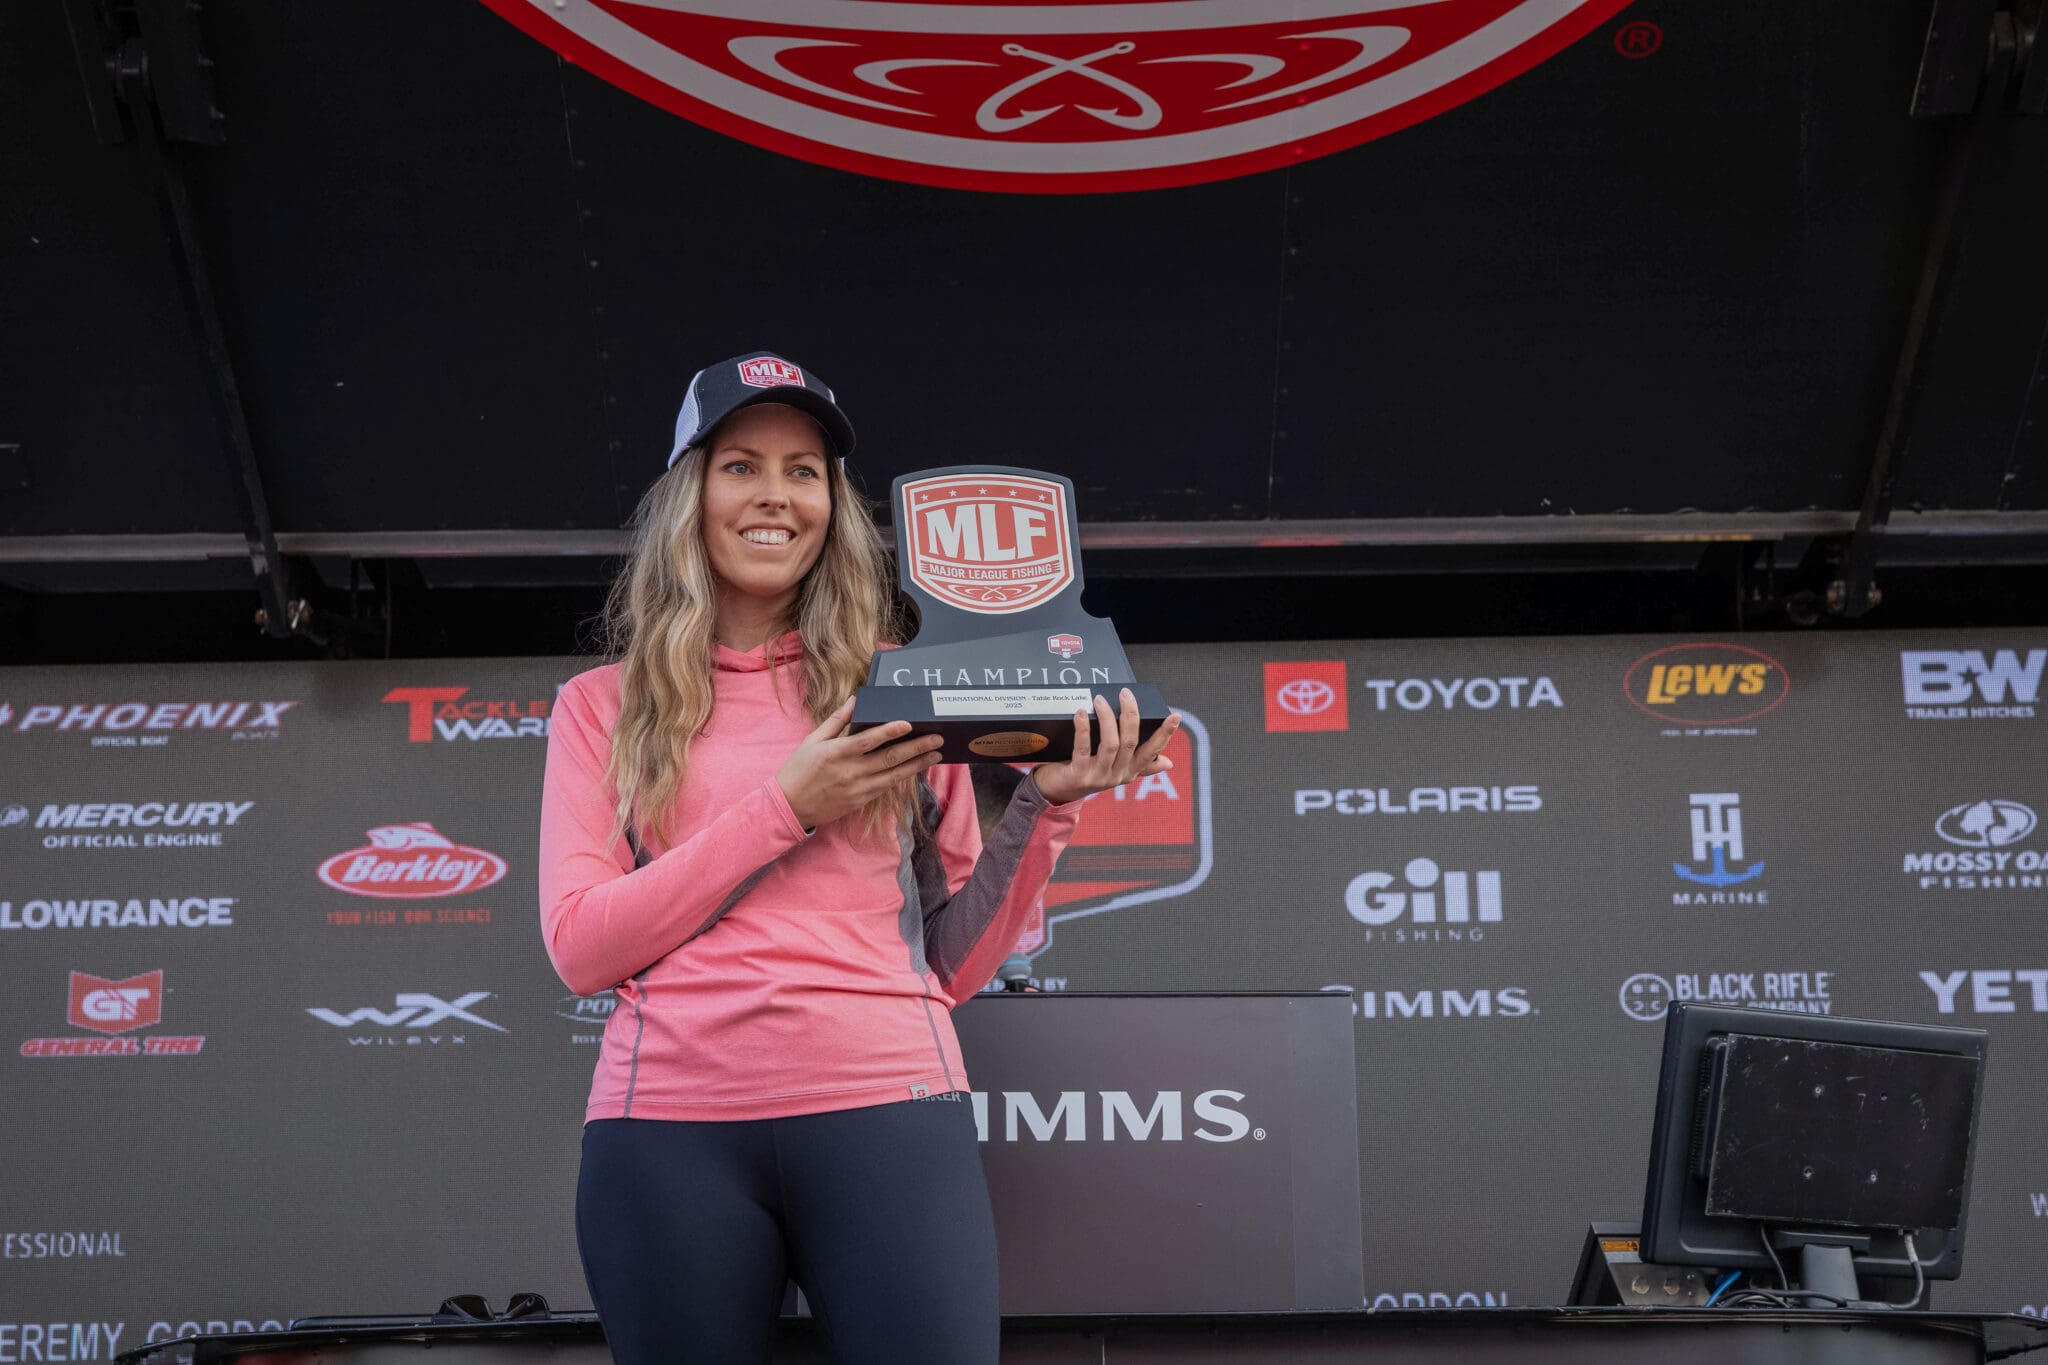 My Experience at the MLF Toyota Series Championship on Table Rock Lake in Missouri